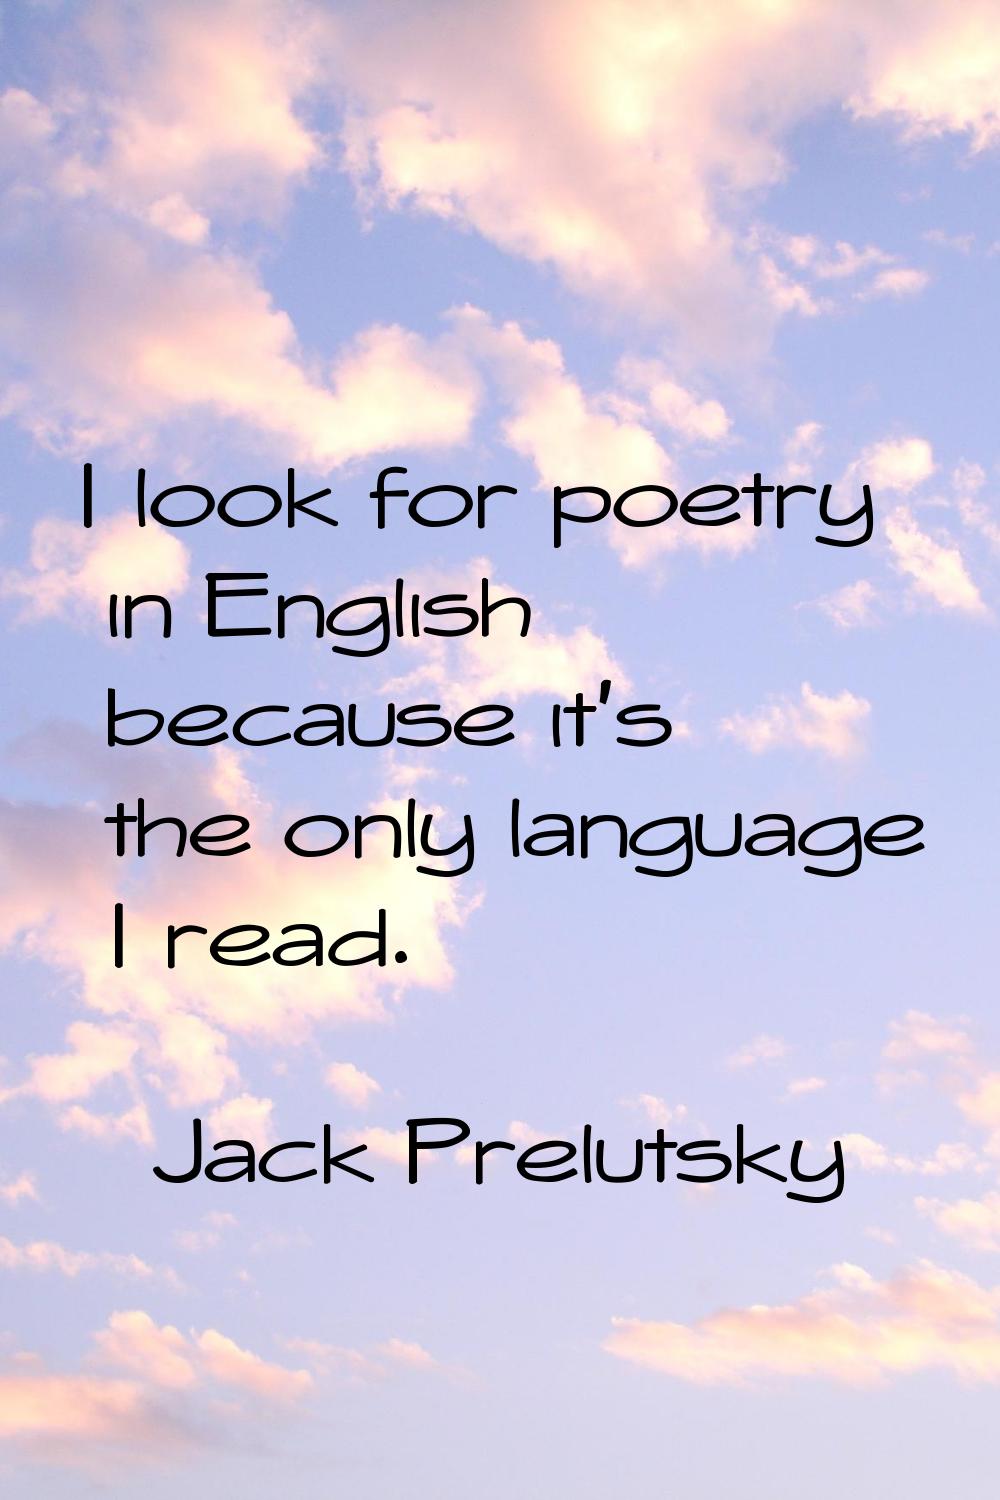 I look for poetry in English because it's the only language I read.